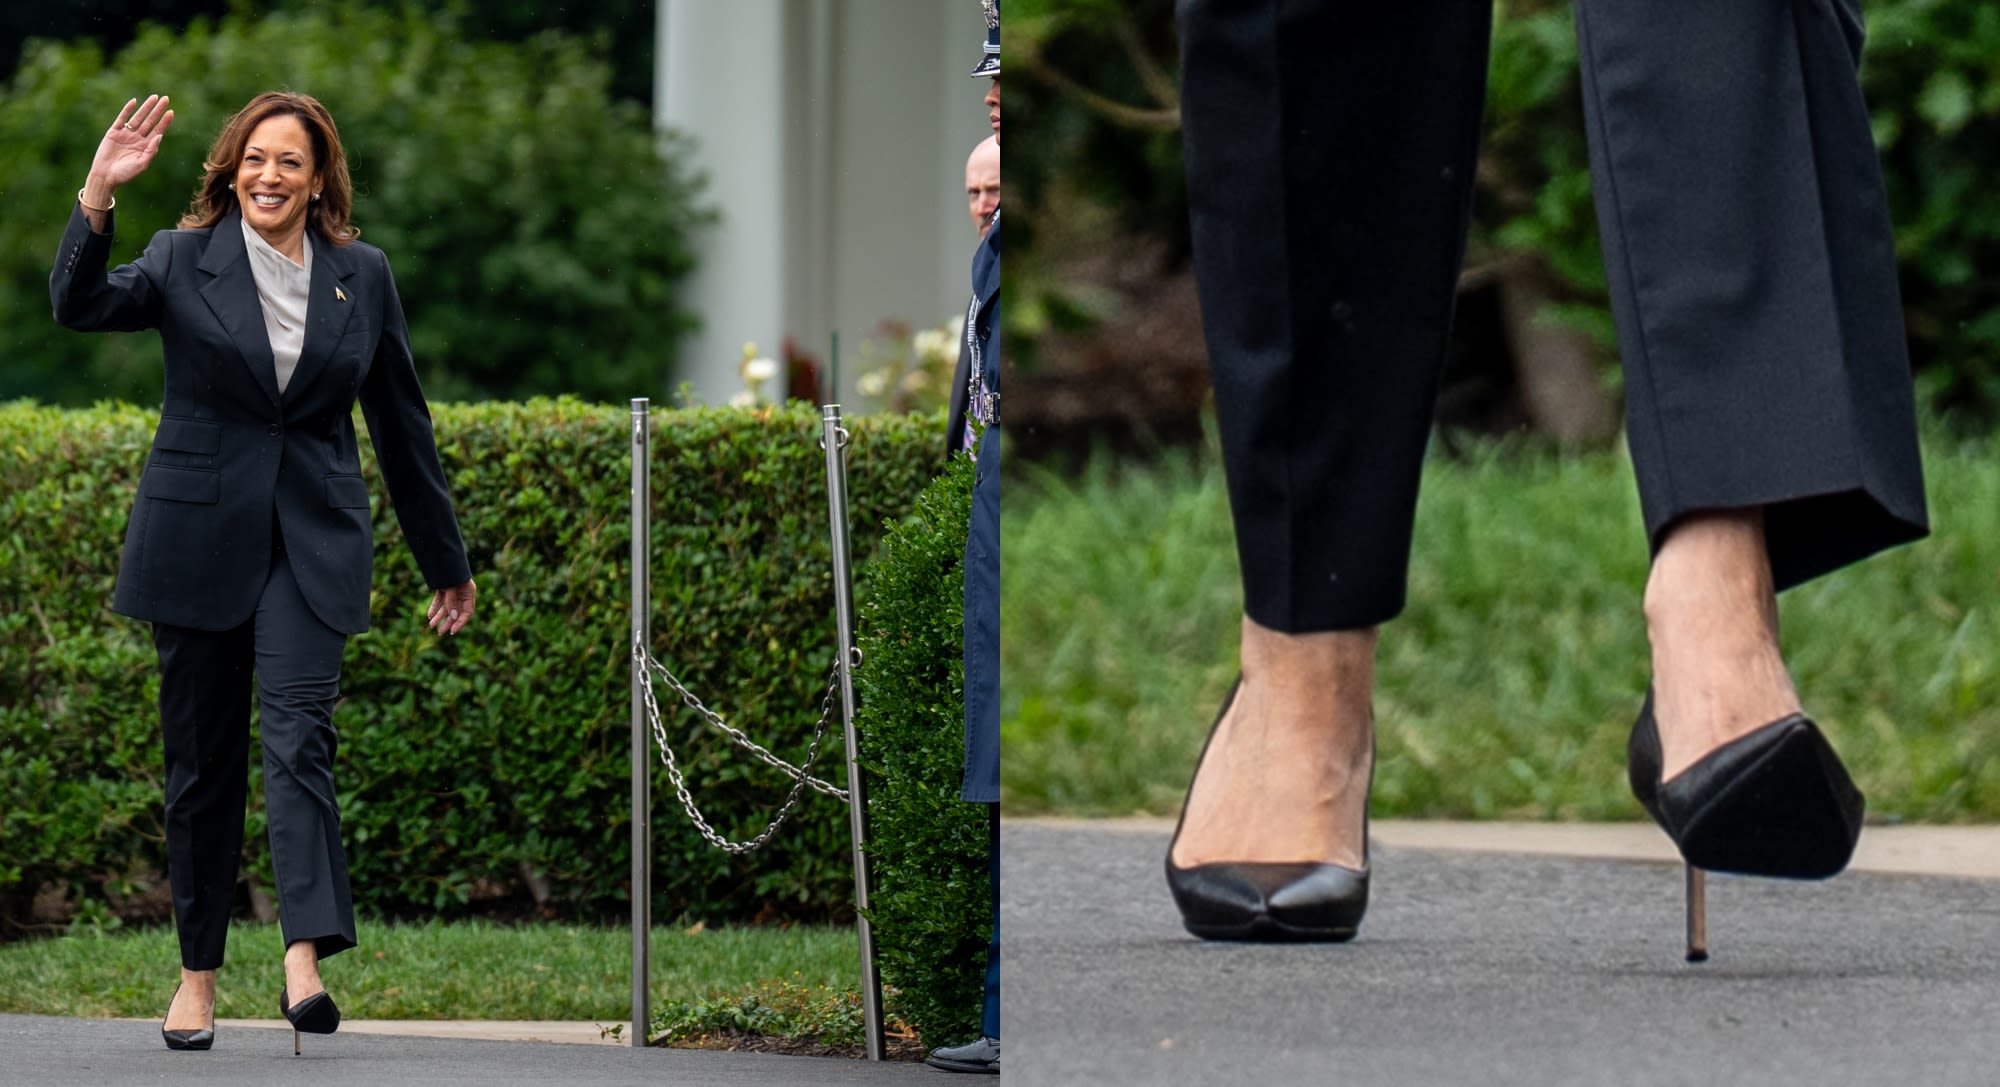 Kamala Harris Does Power Dressing in Black Stilettos to Celebrate NCAA Champions, Following Biden’s Endorsement for Her Presidential Campaign